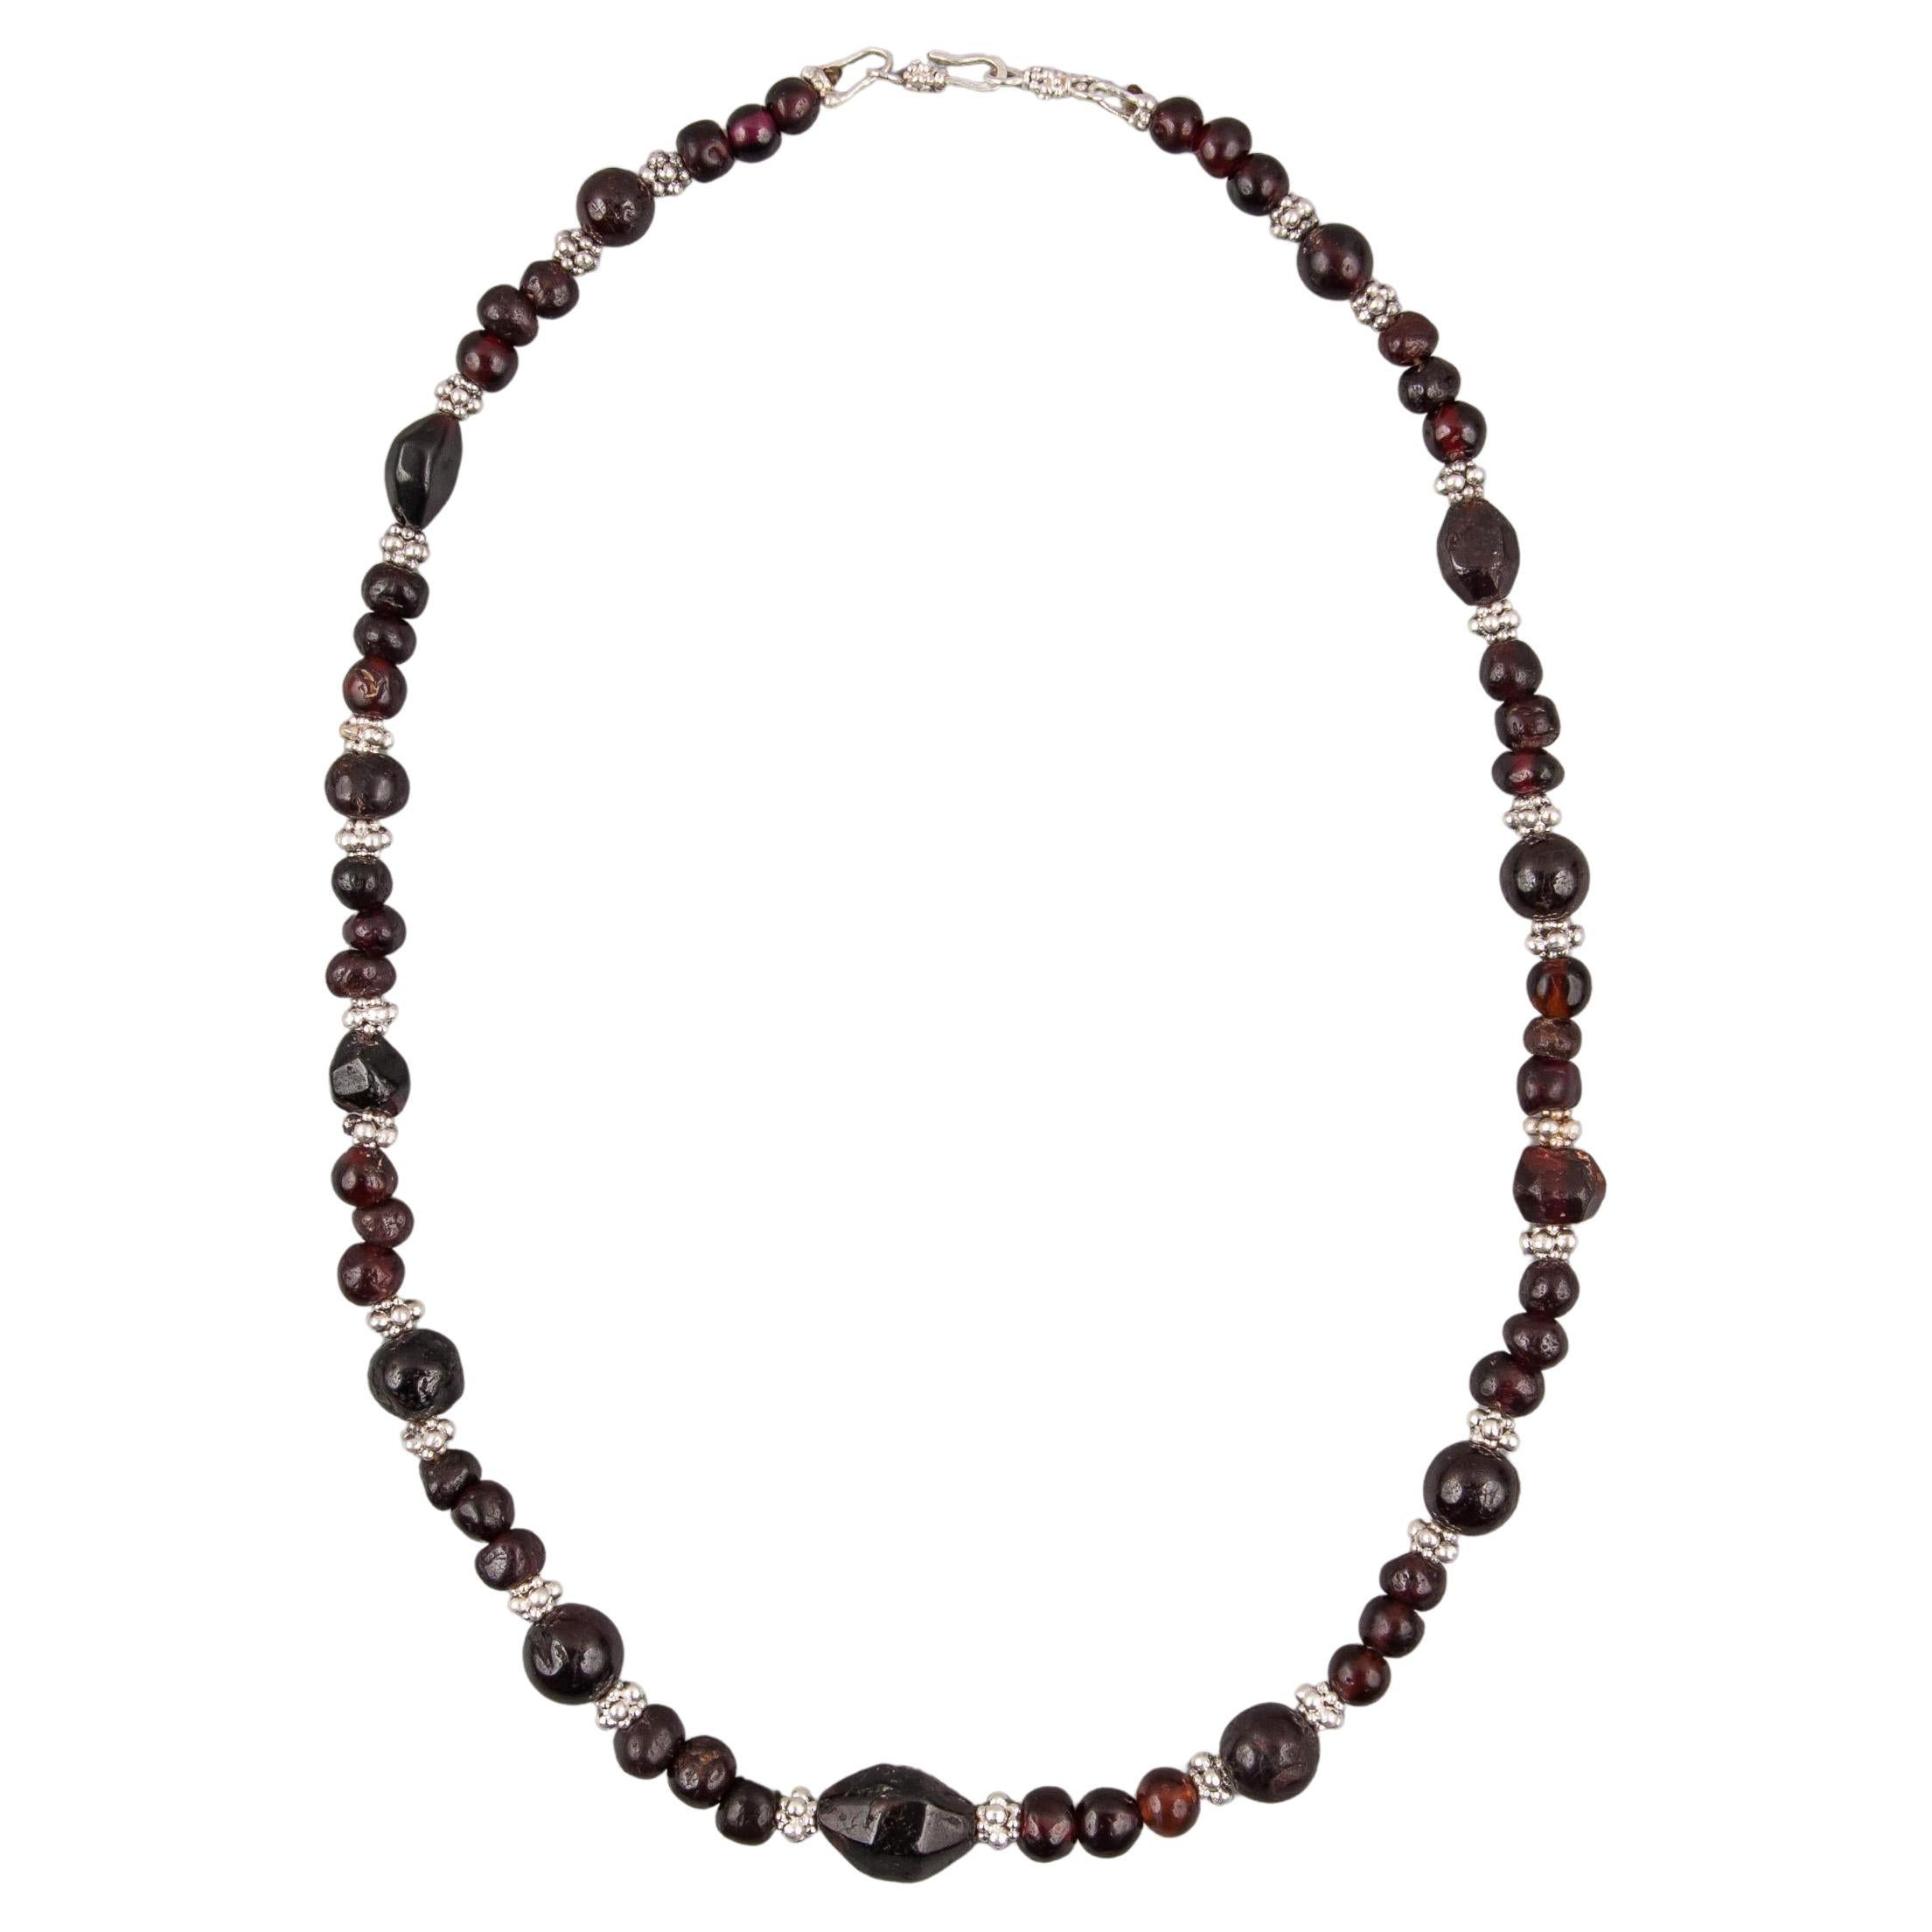 Ancient Garnet Bead Necklace with Fine Silver "Mulberry" Beads and Clasp